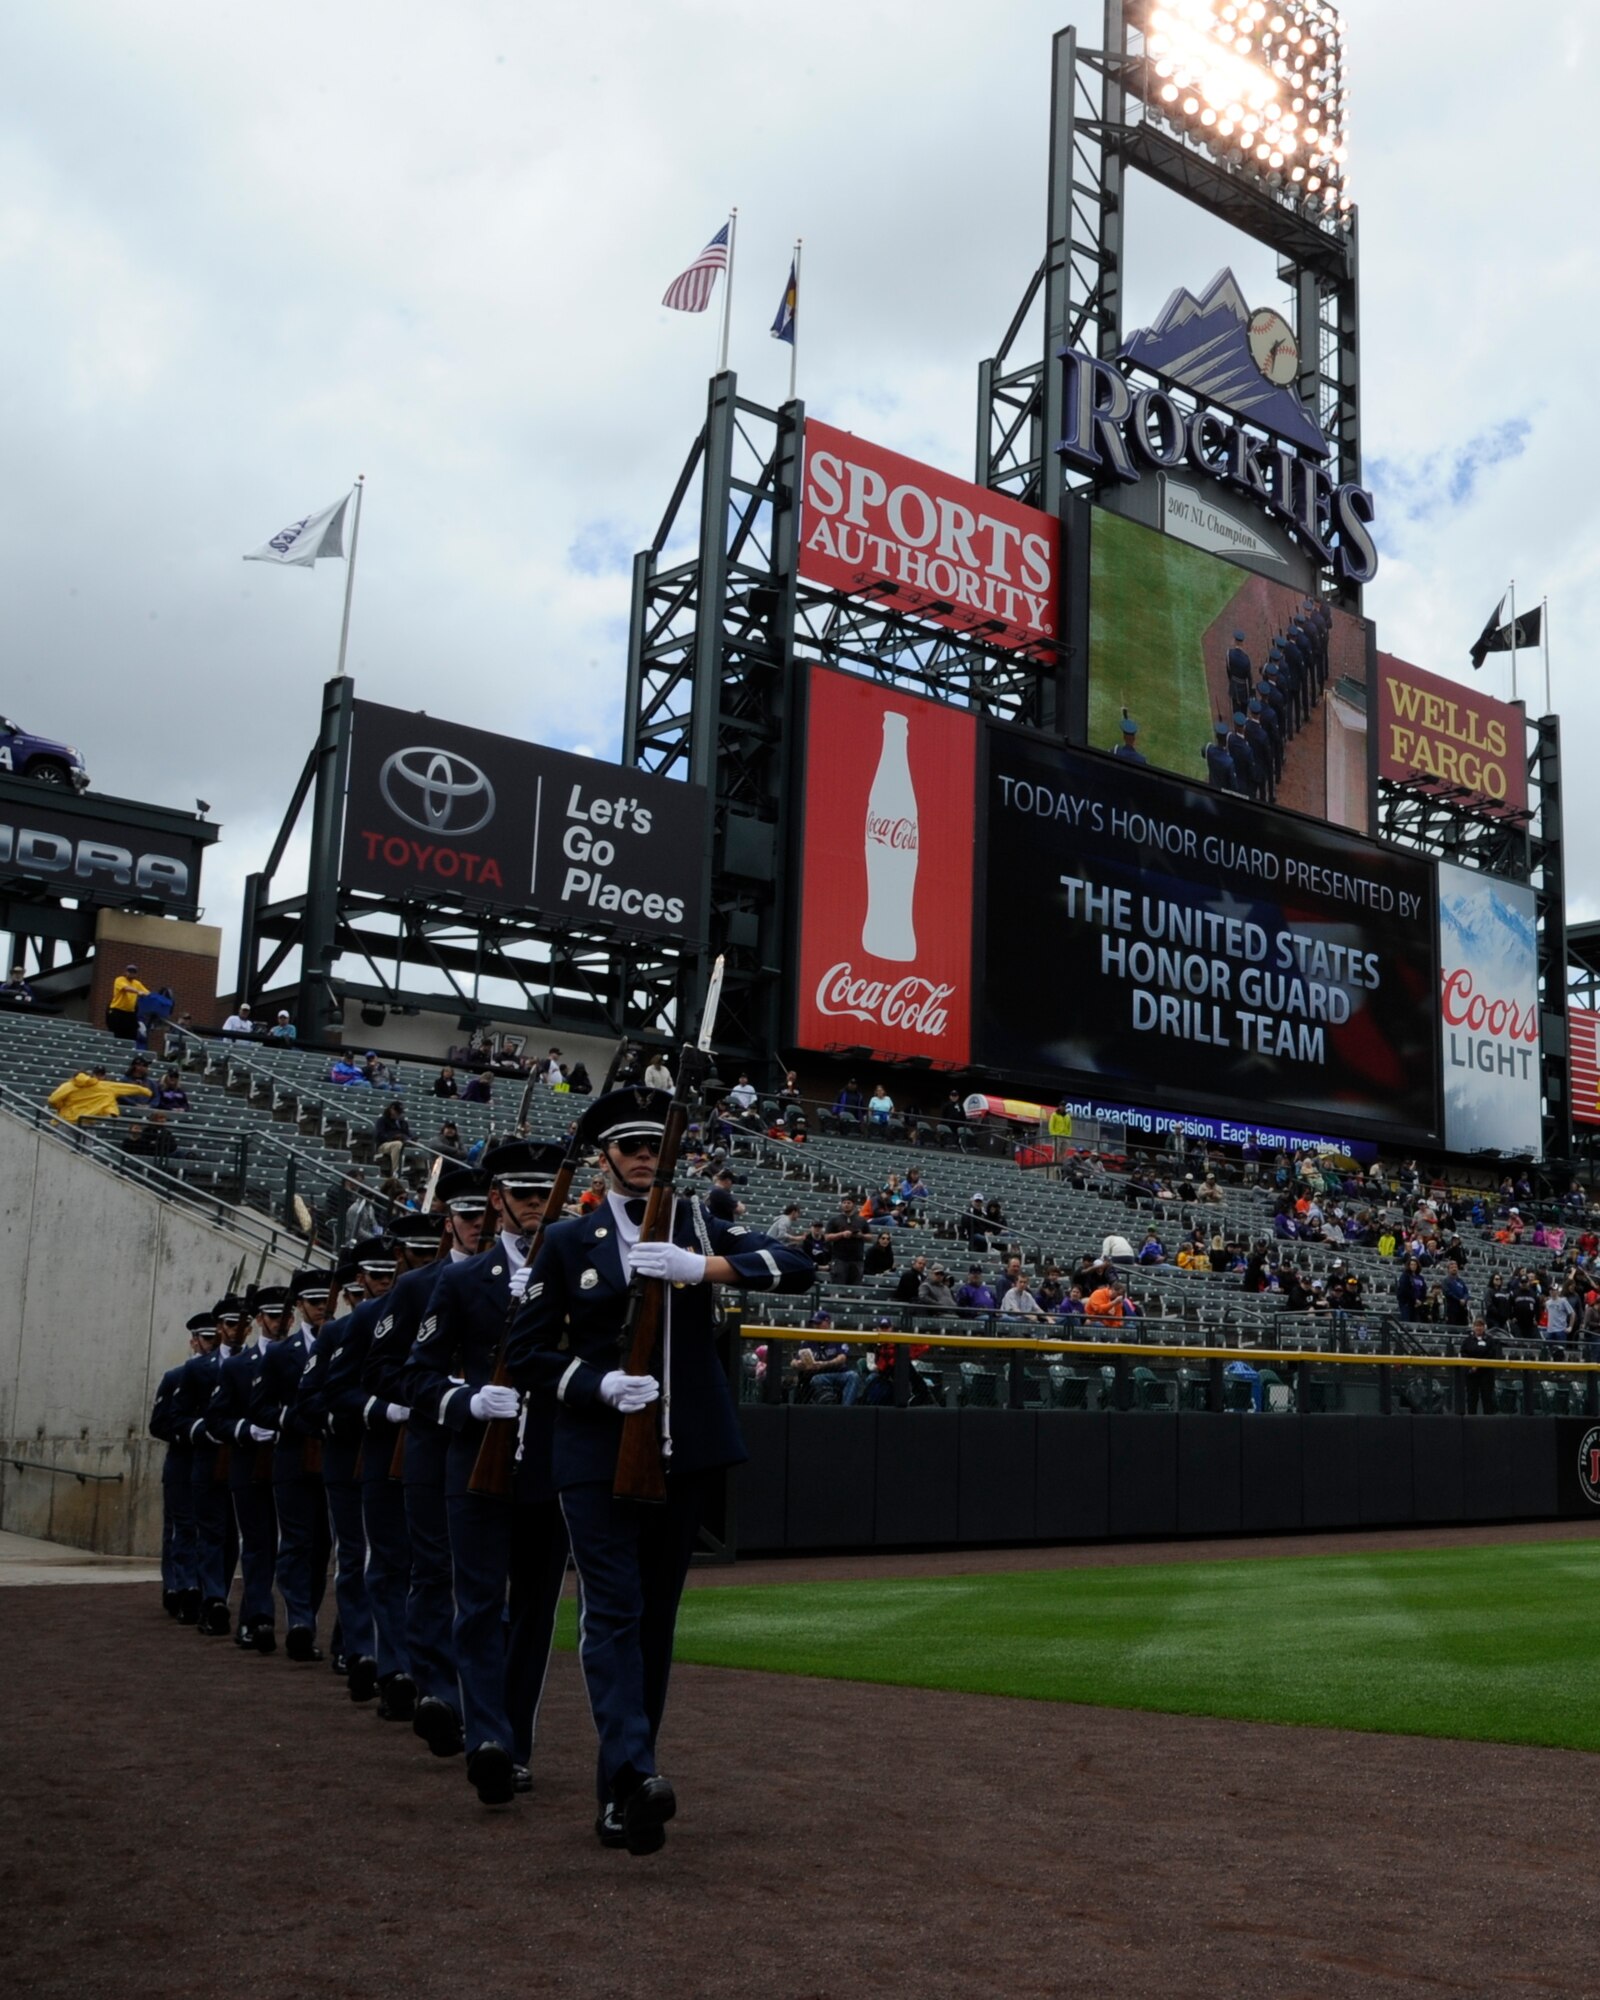 he United States Air Force Honor Guard Drill Team enters the field at a Colorado Rockies game against the San Francisco Giants at Coors Field in Denver, Colo., May 24, 2015. The Drill Team promotes the Air Force mission by showcasing drill performances at public and military venues to recruit, retain and inspire Airmen. (U.S. Air Force photo by Senior Airman Preston Webb/RELEASED)